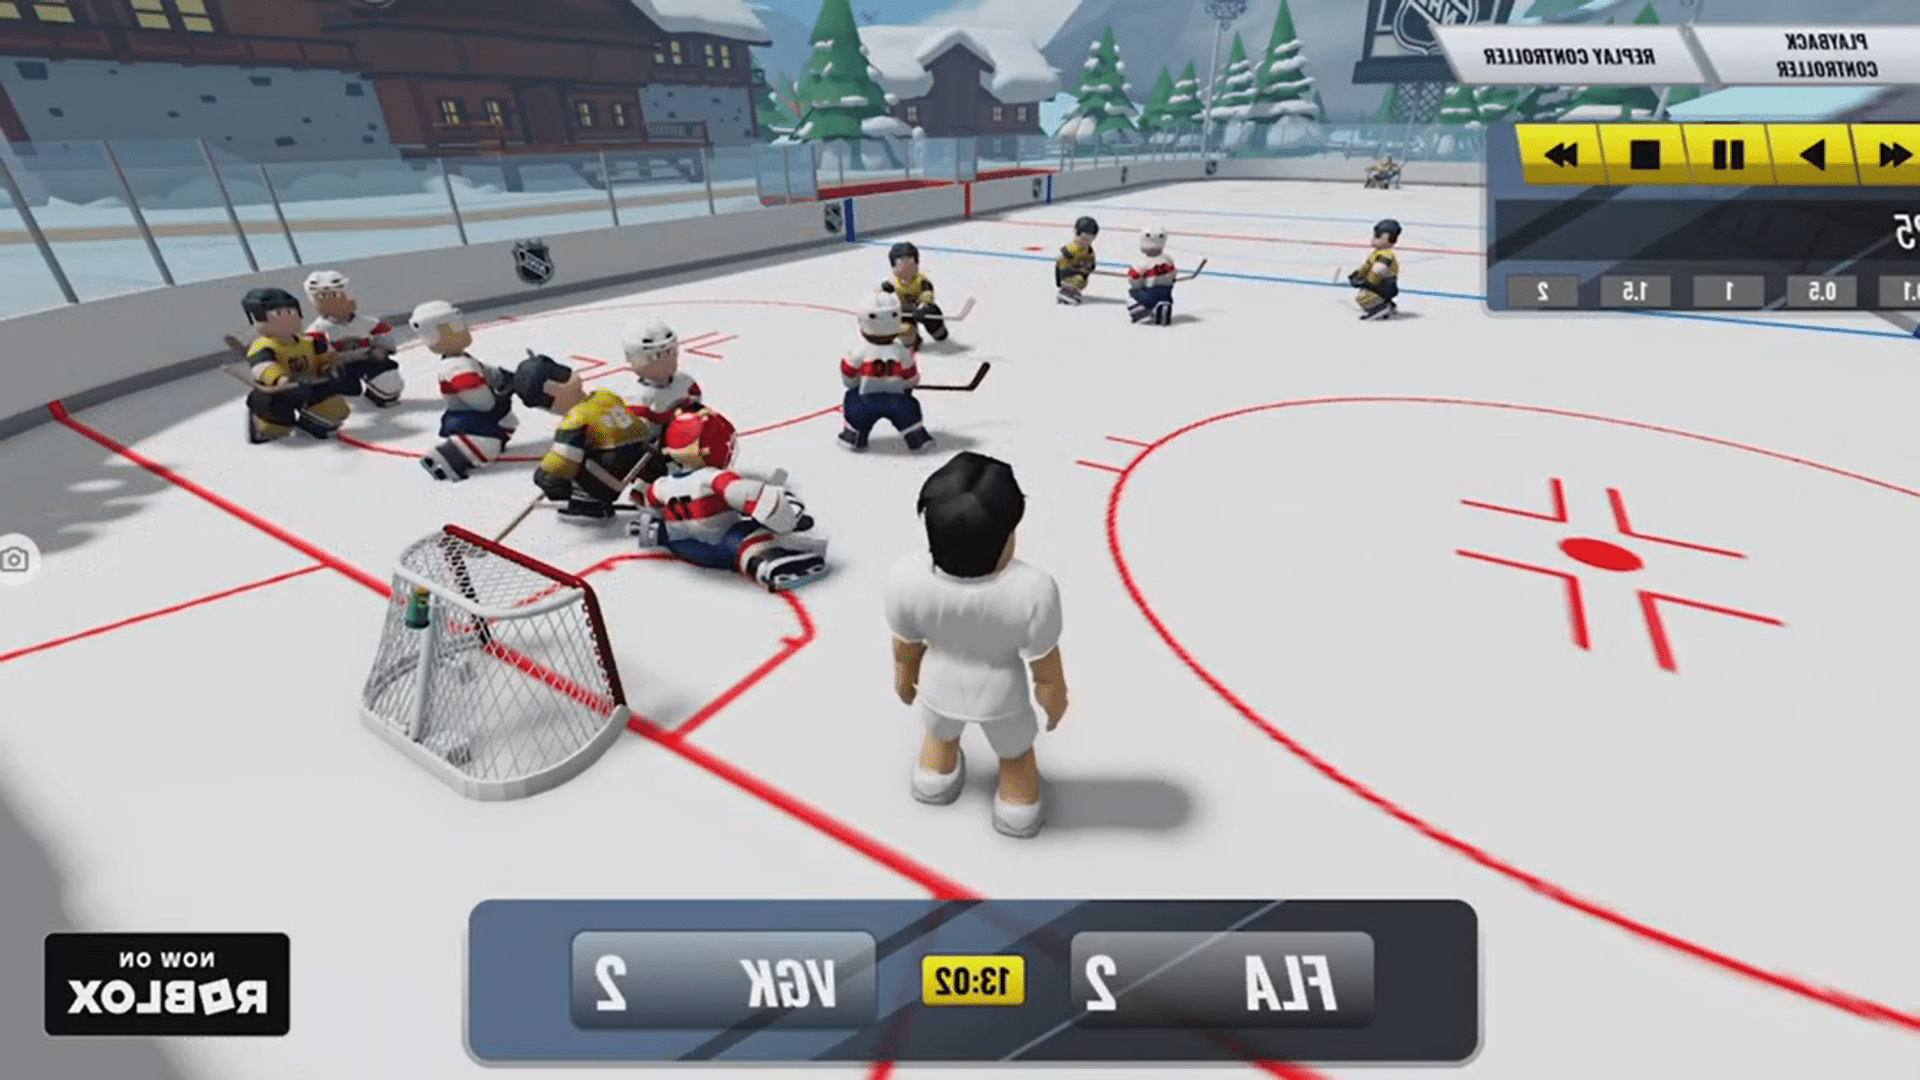 The activation of Roblox used the NHL's puck and player tracking system.